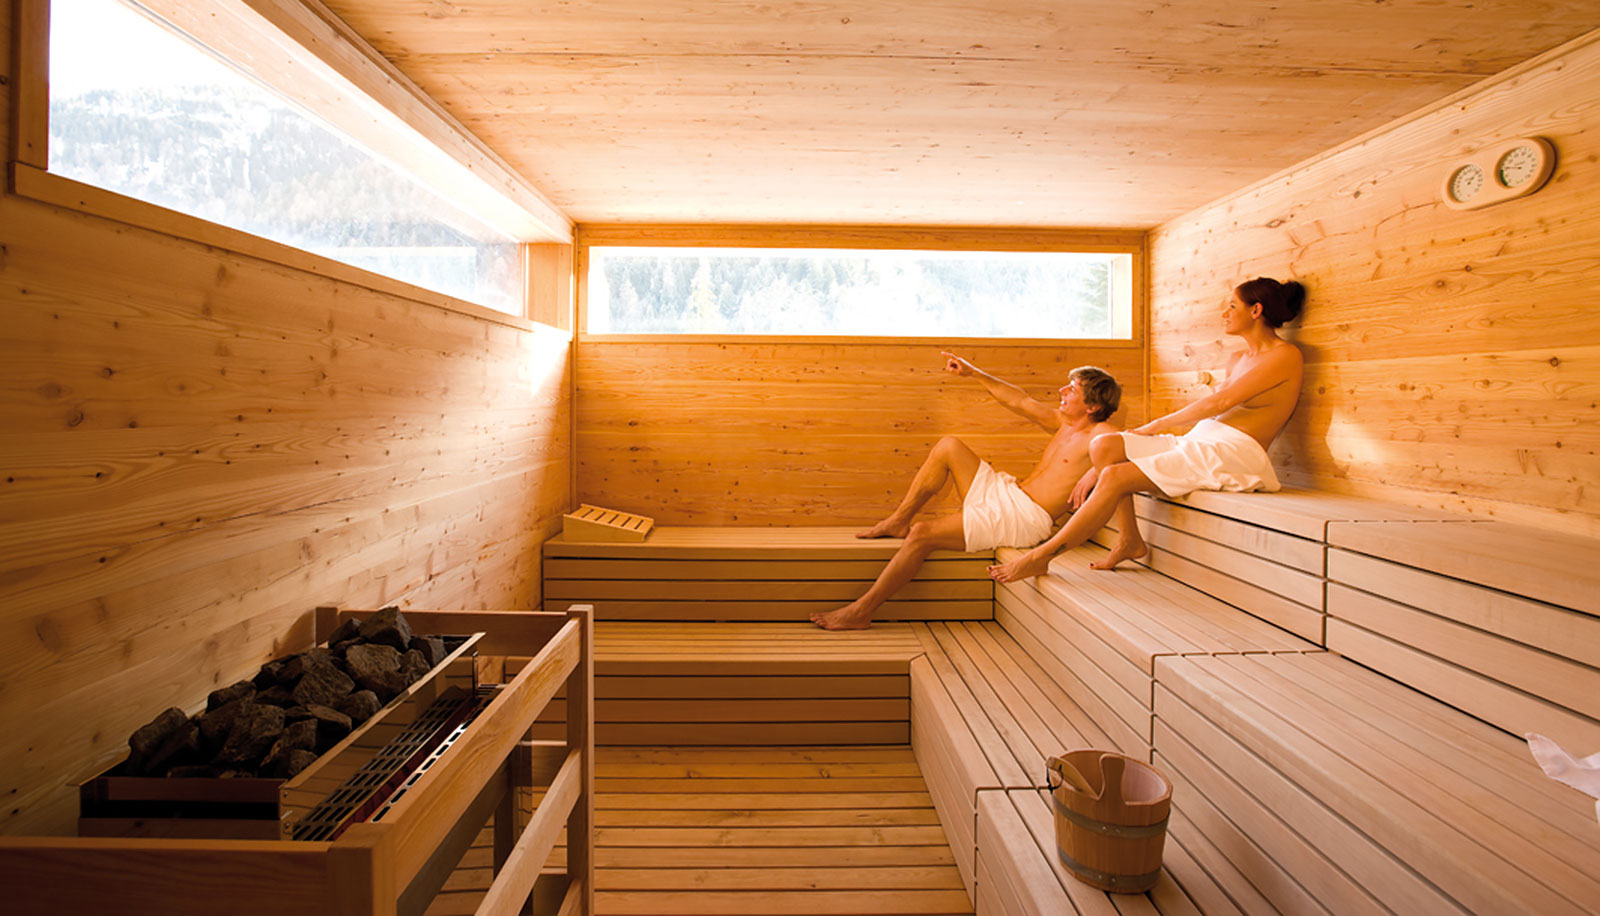 A woman and a men in the Finnish sauna of Arosea Life Balance Hotel in Ultental-Val d'Ultimo